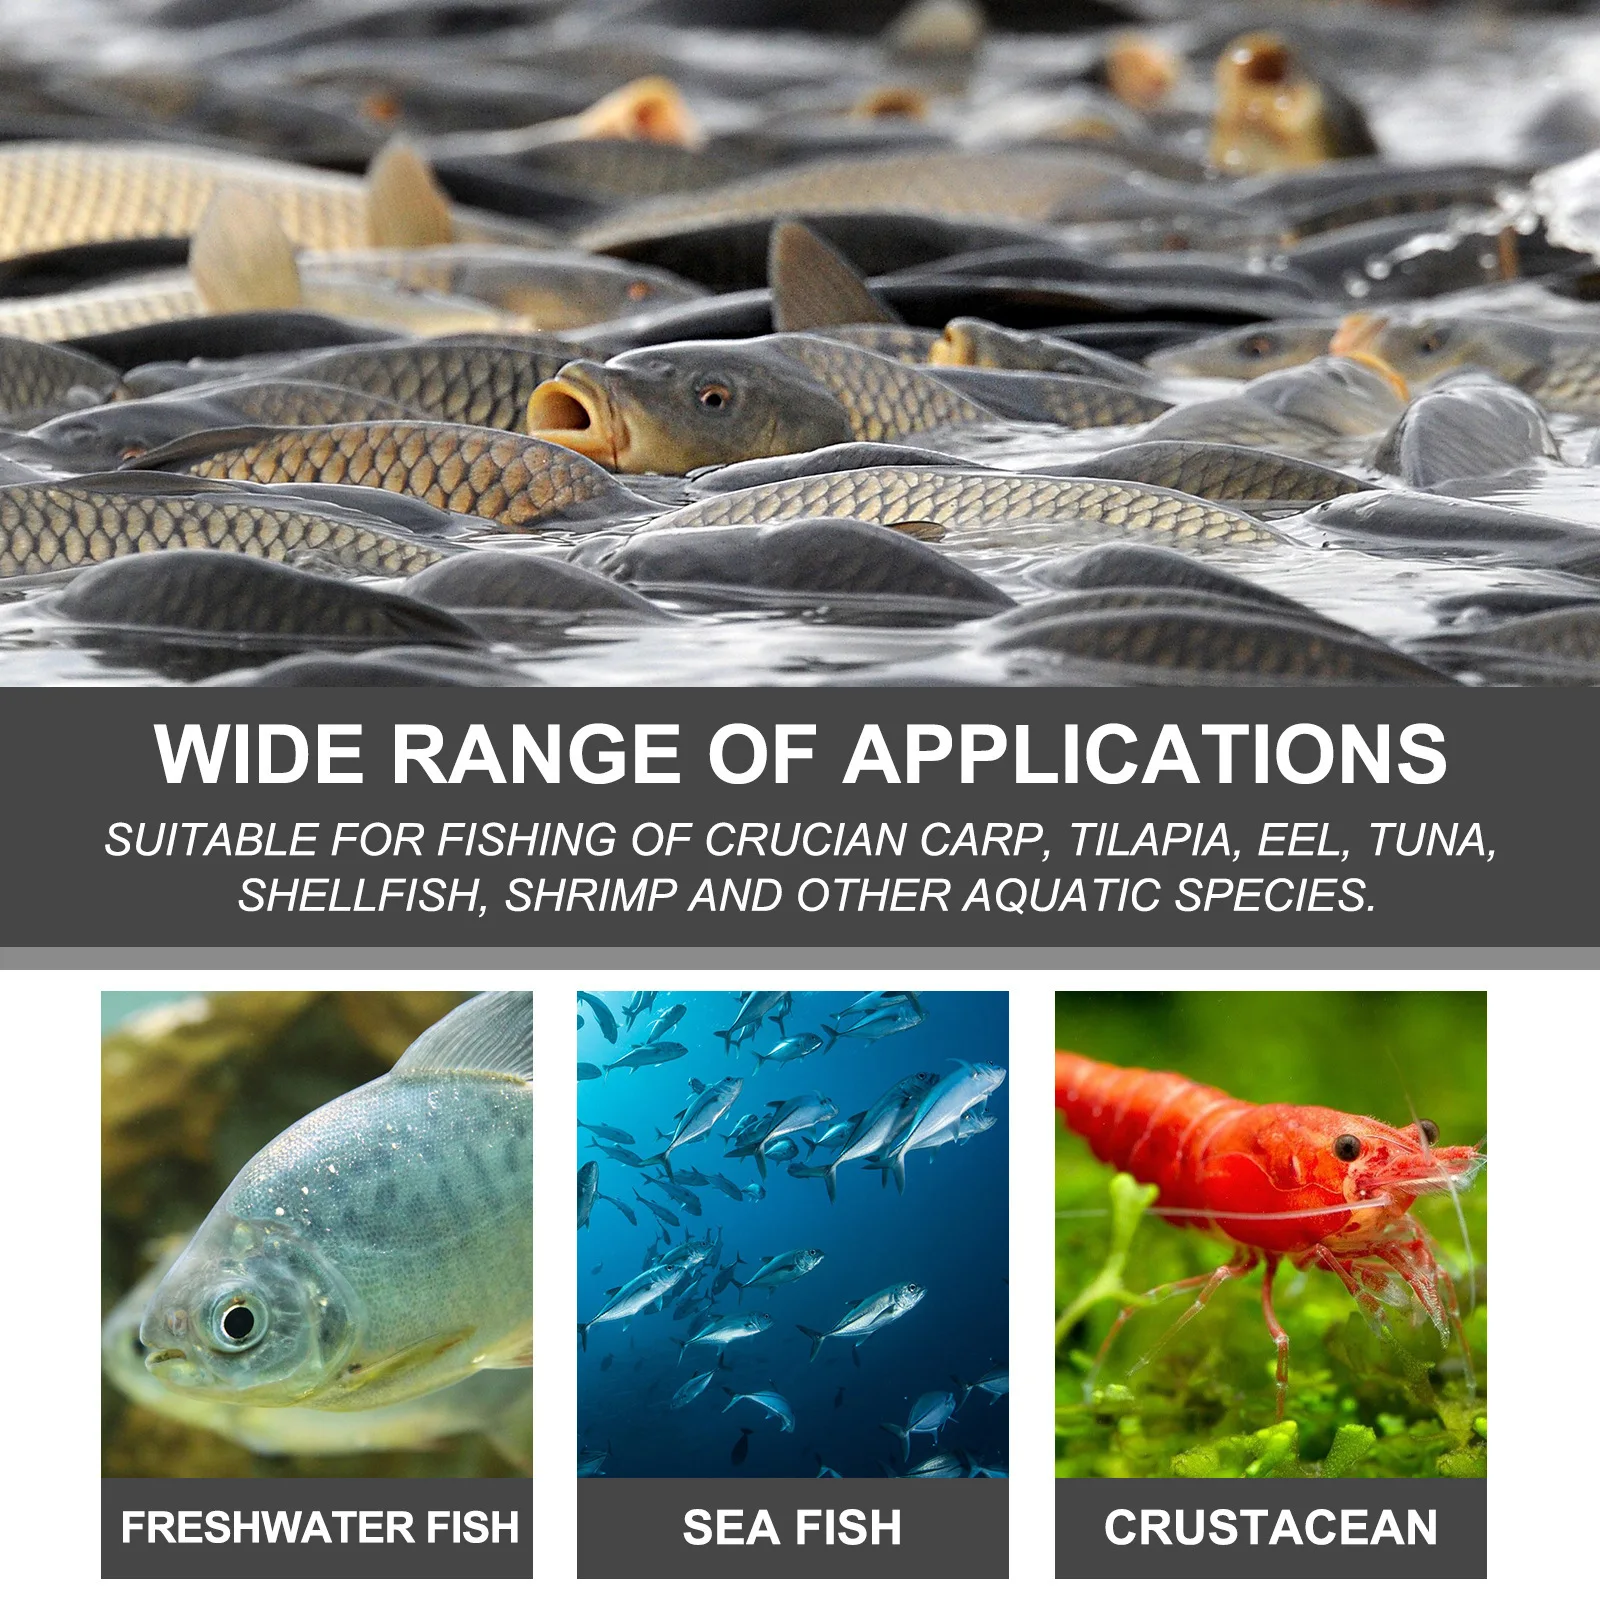 https://ae01.alicdn.com/kf/S3147e129b7cd4be0b4f0f0c95ee2314a2/Fish-Bait-Powder-Additive-Fishmeal-Fish-Buster-Carp-Killer-Concentrated-Blood-Worm-Scent-Shrimp-Smell-Attractant.jpg